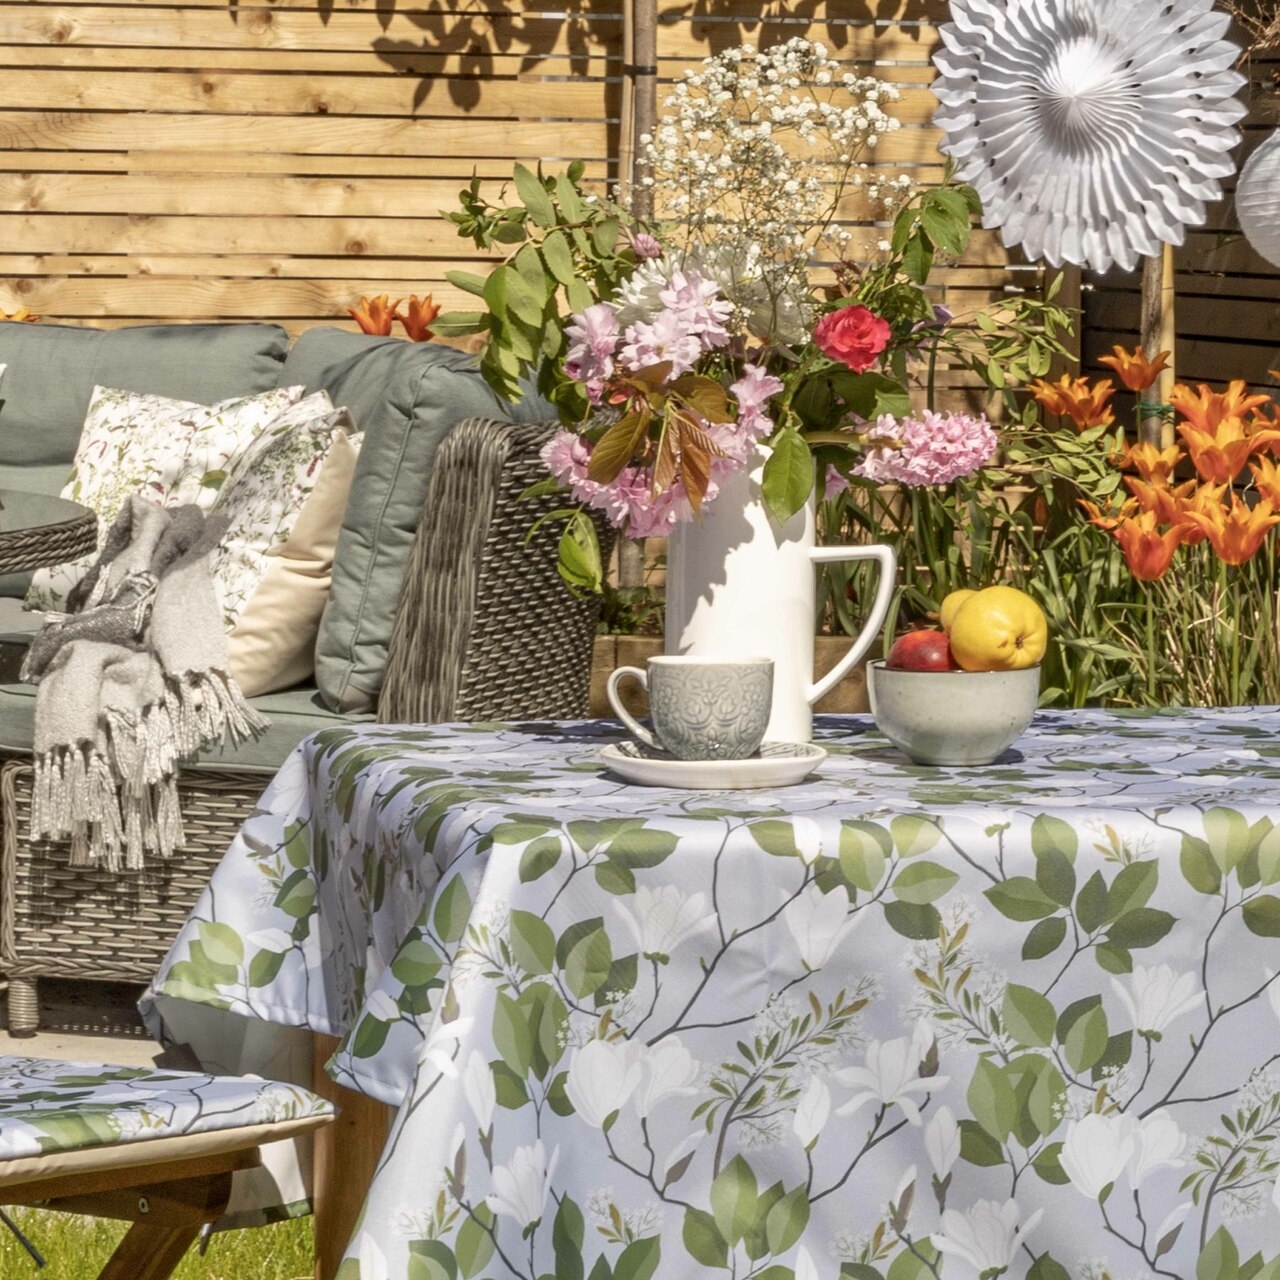 Celina Digby Luxury Outdoor Garden Tablecloth AVAILABLE IN 5 SIZES – Optional Centre Hole for Parasol Magnolia Grey XXL (300cm x 140cm)